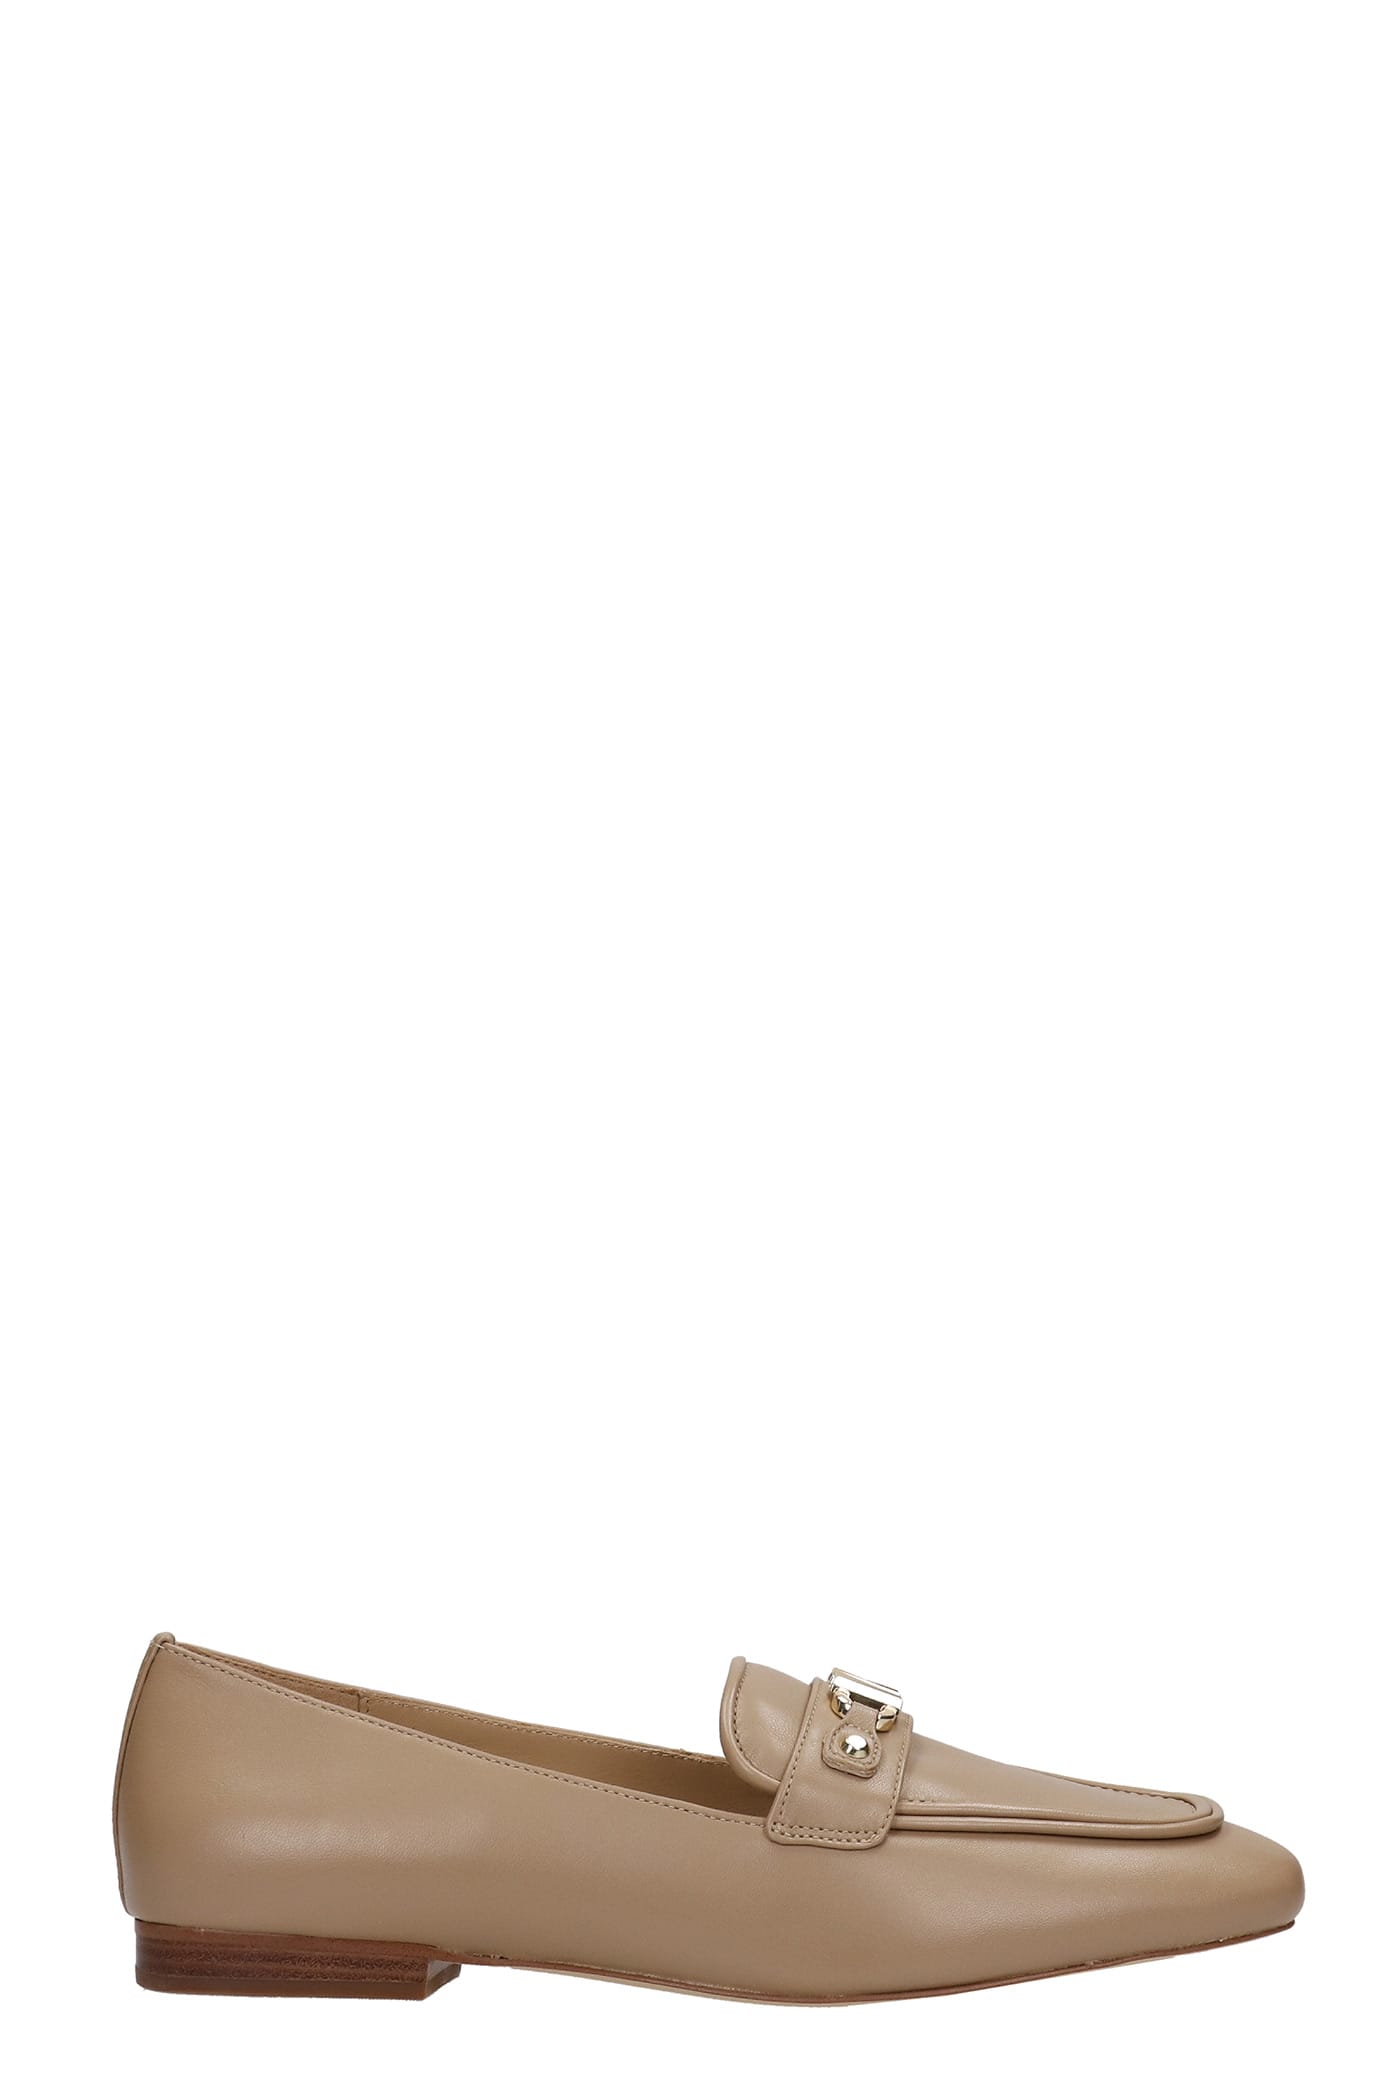 Michael Kors Farrah Loafers In Camel Leather